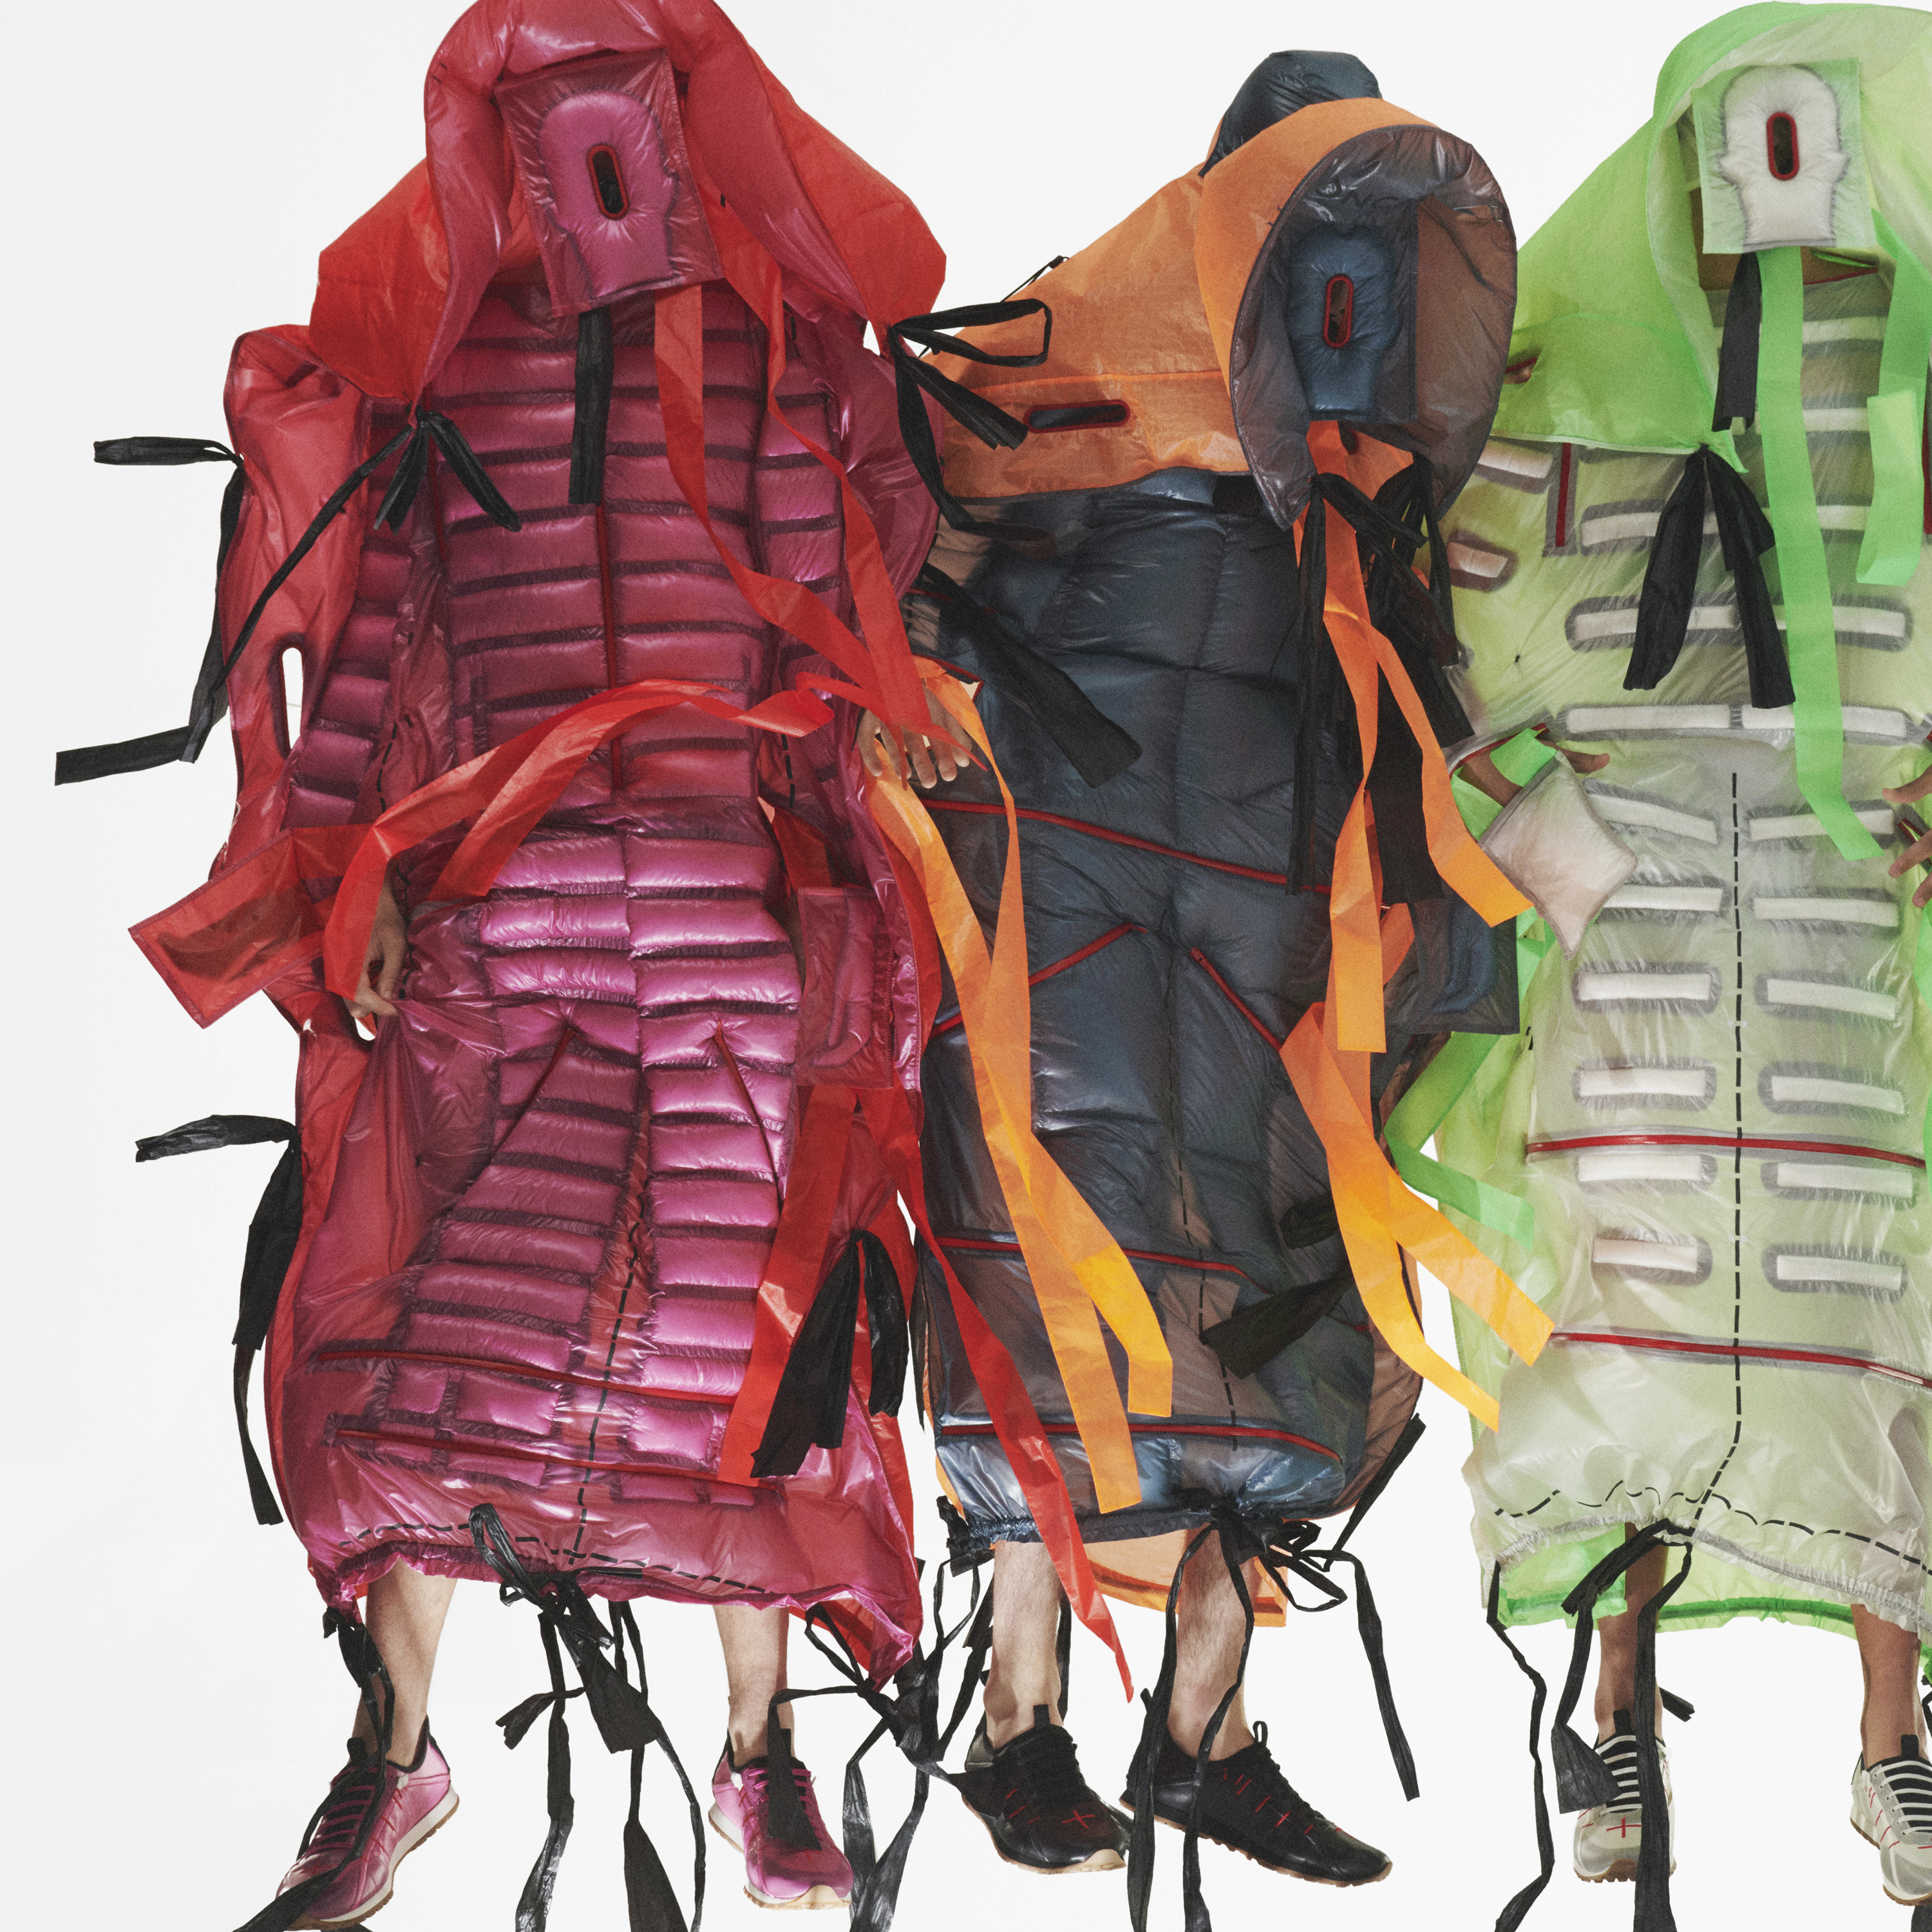 Craig Green launches new Moncler Genius collection | Wallpaper